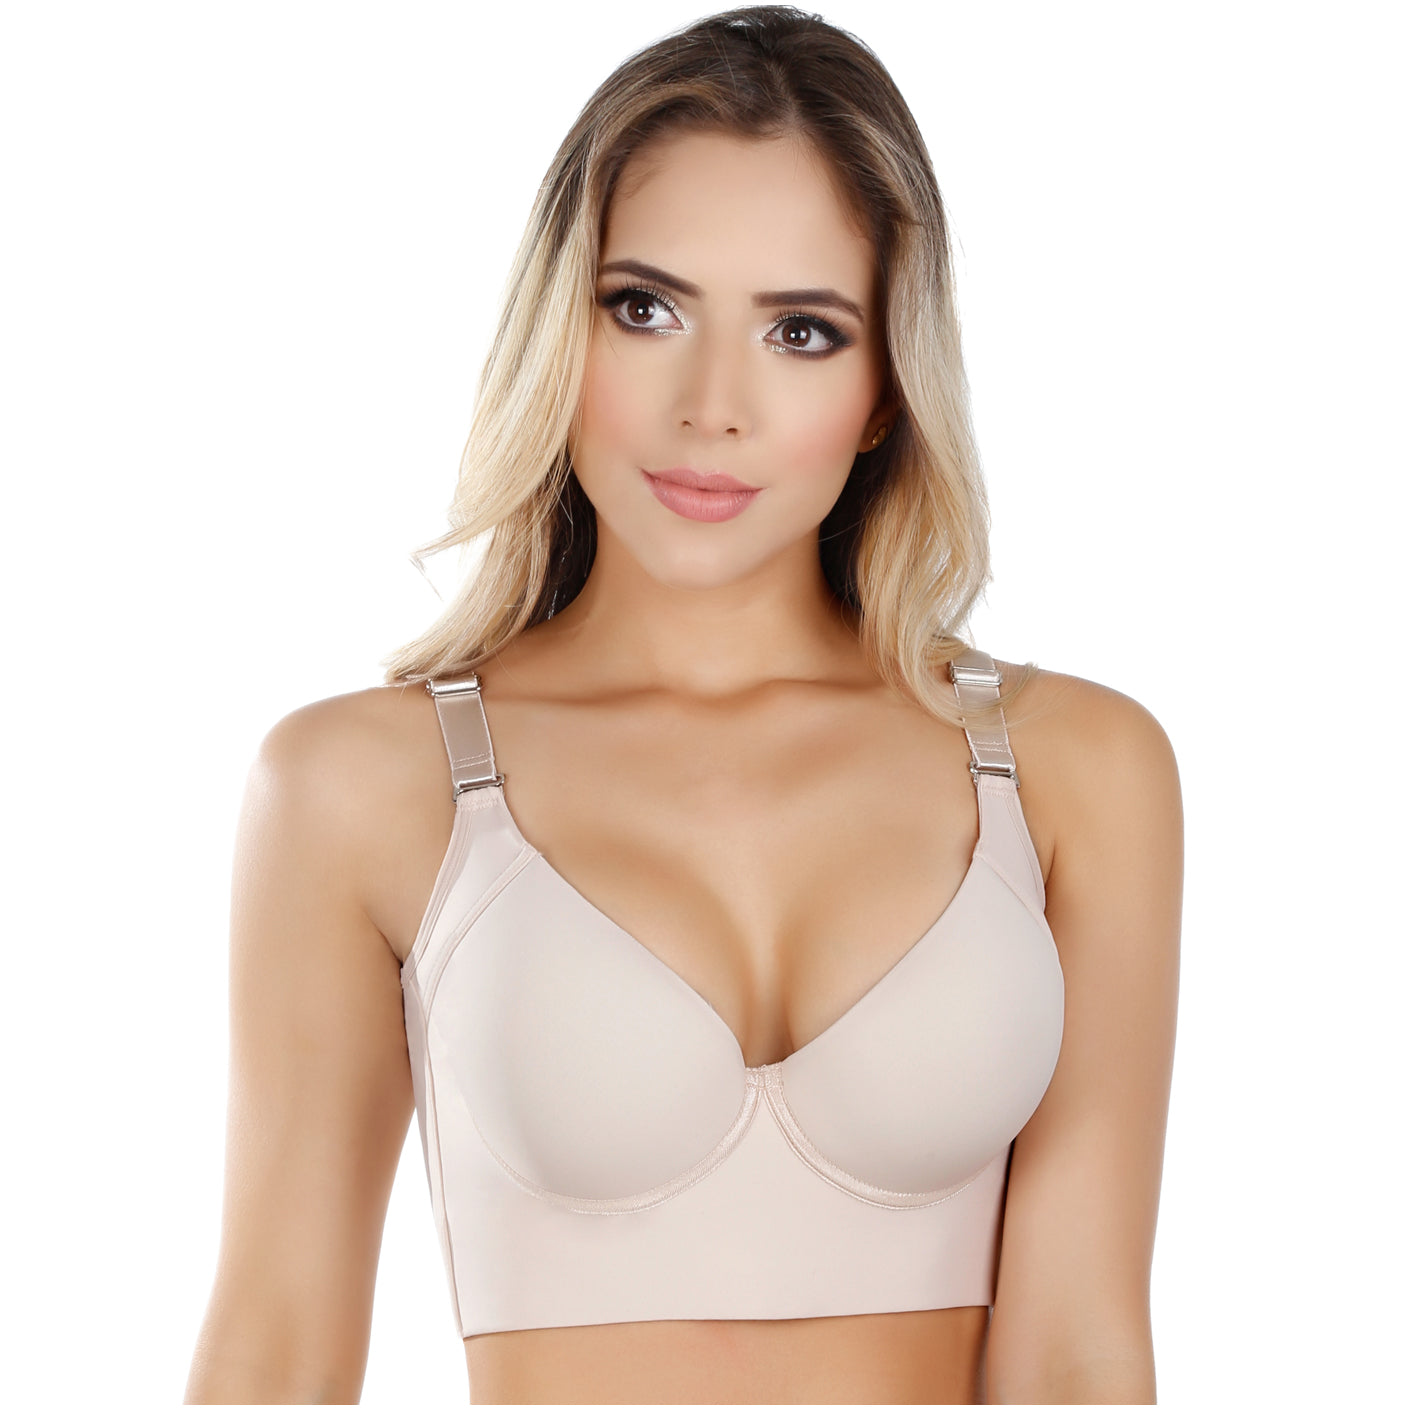 Vgplay Thick Padded Push Up Bras For Women Add 2 Cup Strength